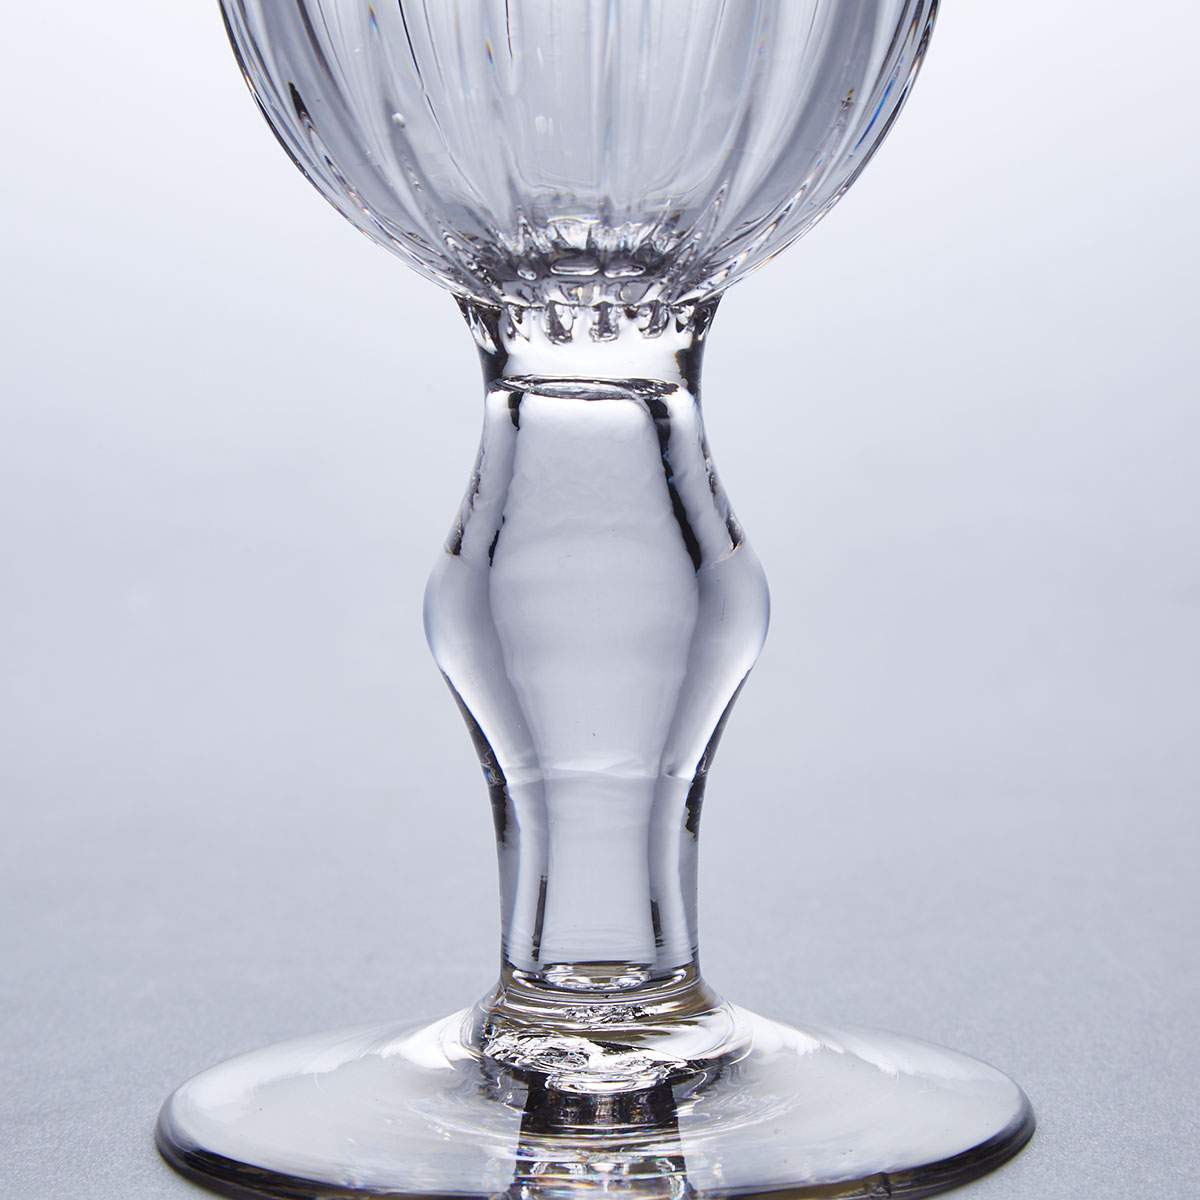 English Hollow Knopped Stemmed Sweetmeat or Champagne Glass, mid-18th century